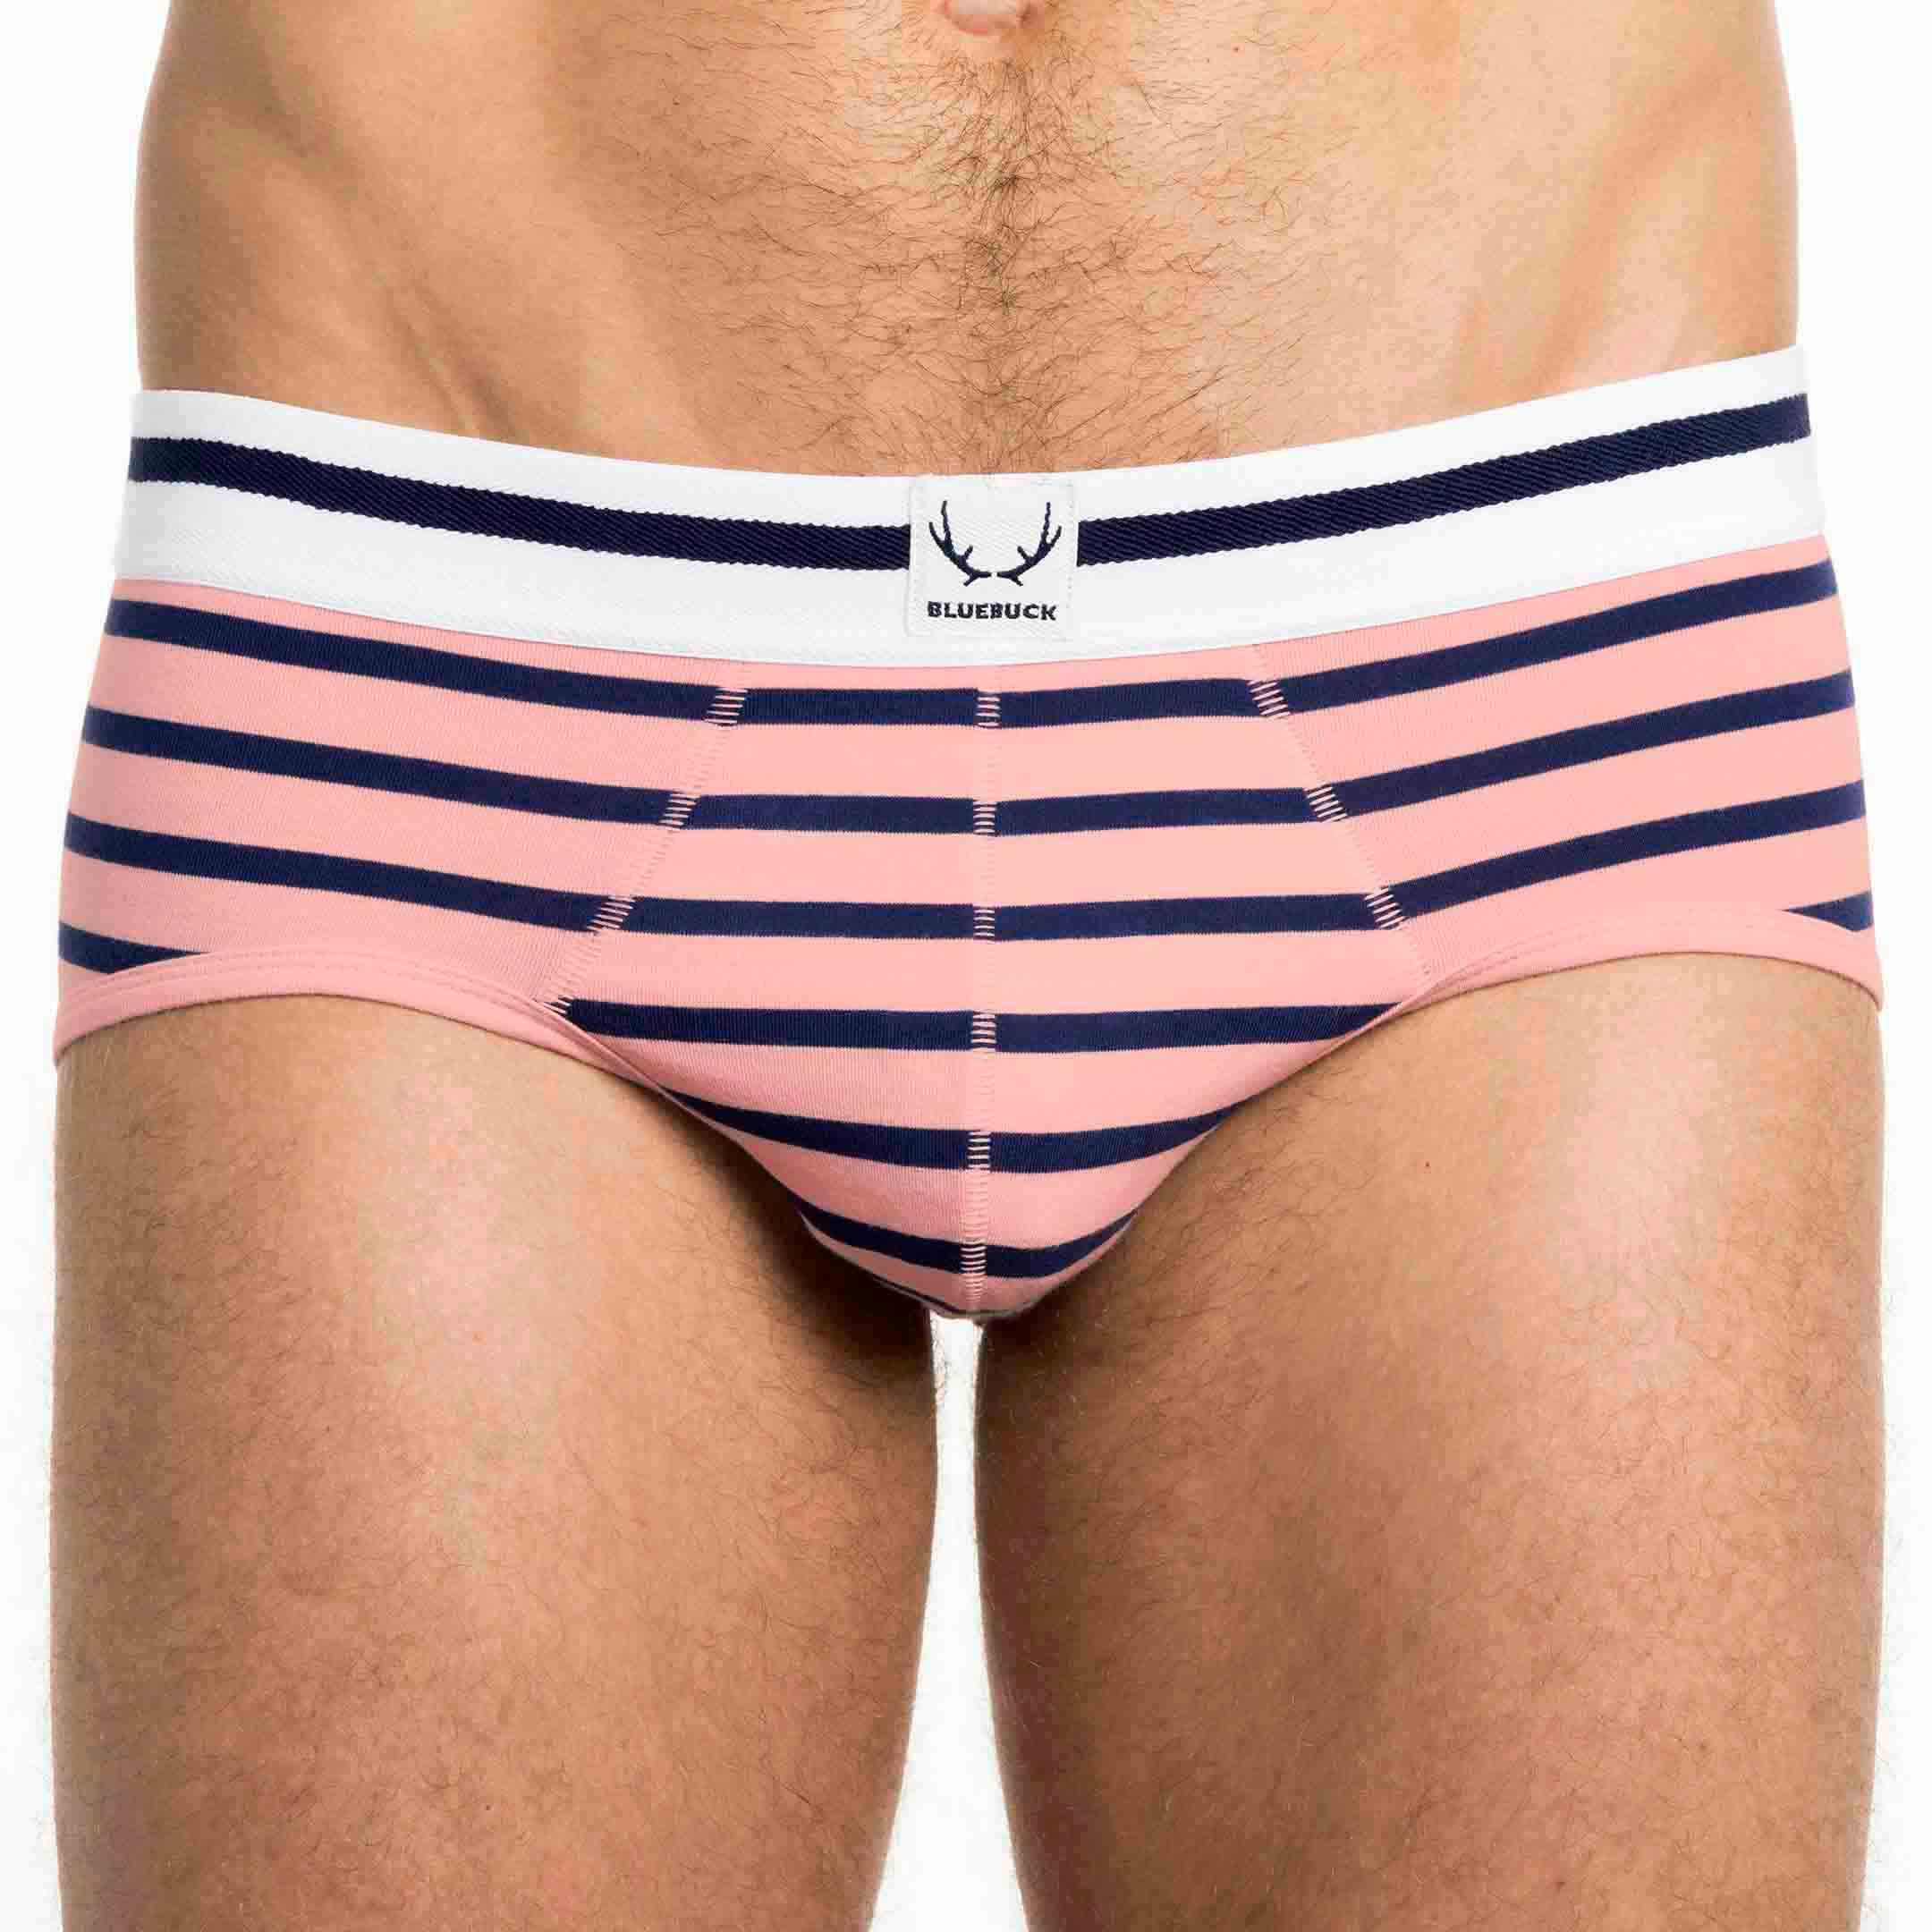 Pink and black striped underpants made of organic cotton from Bluebuck